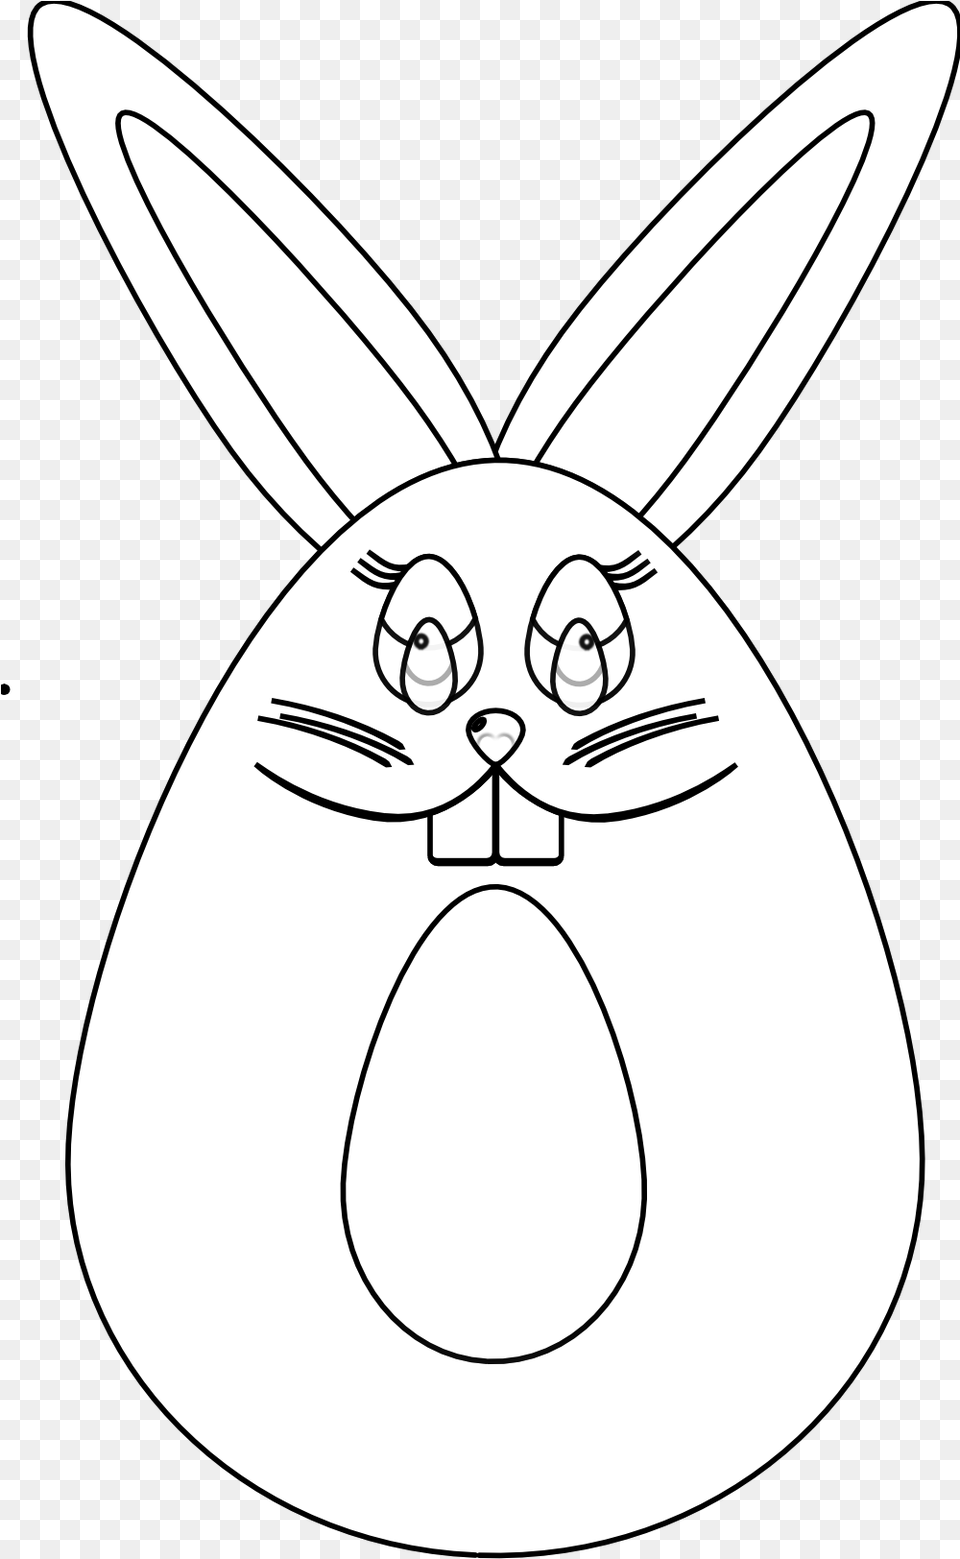 Free Black And White Bunny Pictures Download Free Clip Cartoon, Animal, Fish, Sea Life, Shark Png